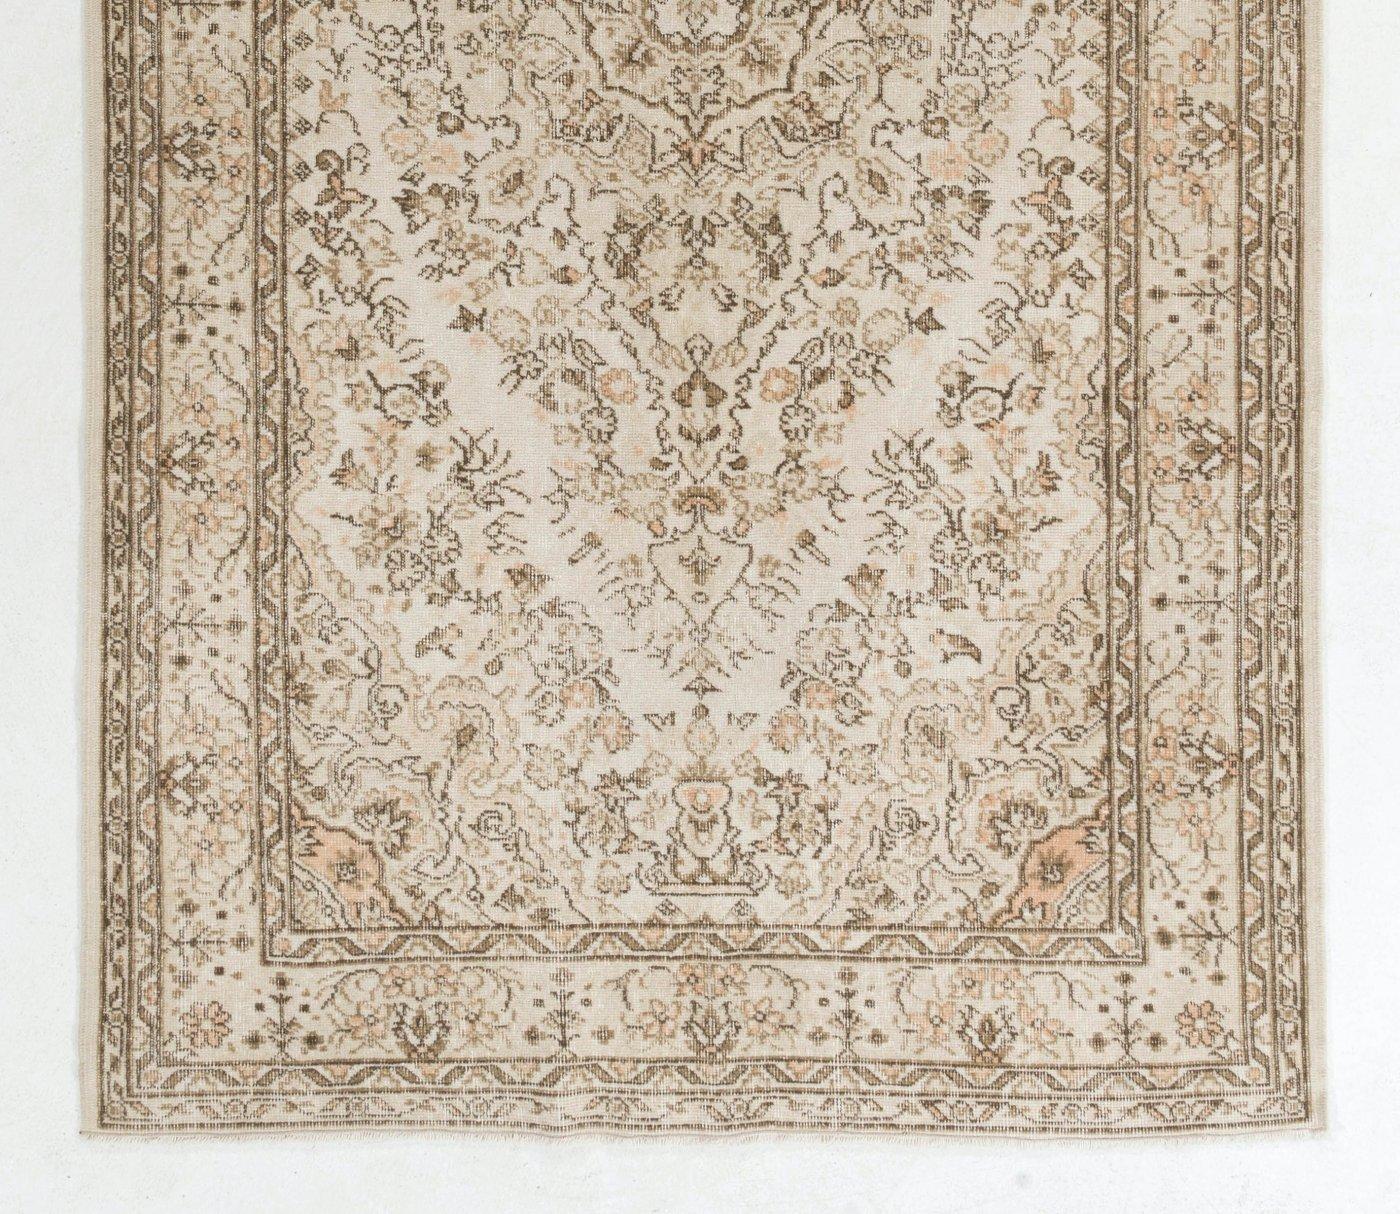 5.7x10 Ft Vintage Hand-Knotted Floral Turkish Oushak Area Rug in Soft Colors In Good Condition For Sale In Philadelphia, PA